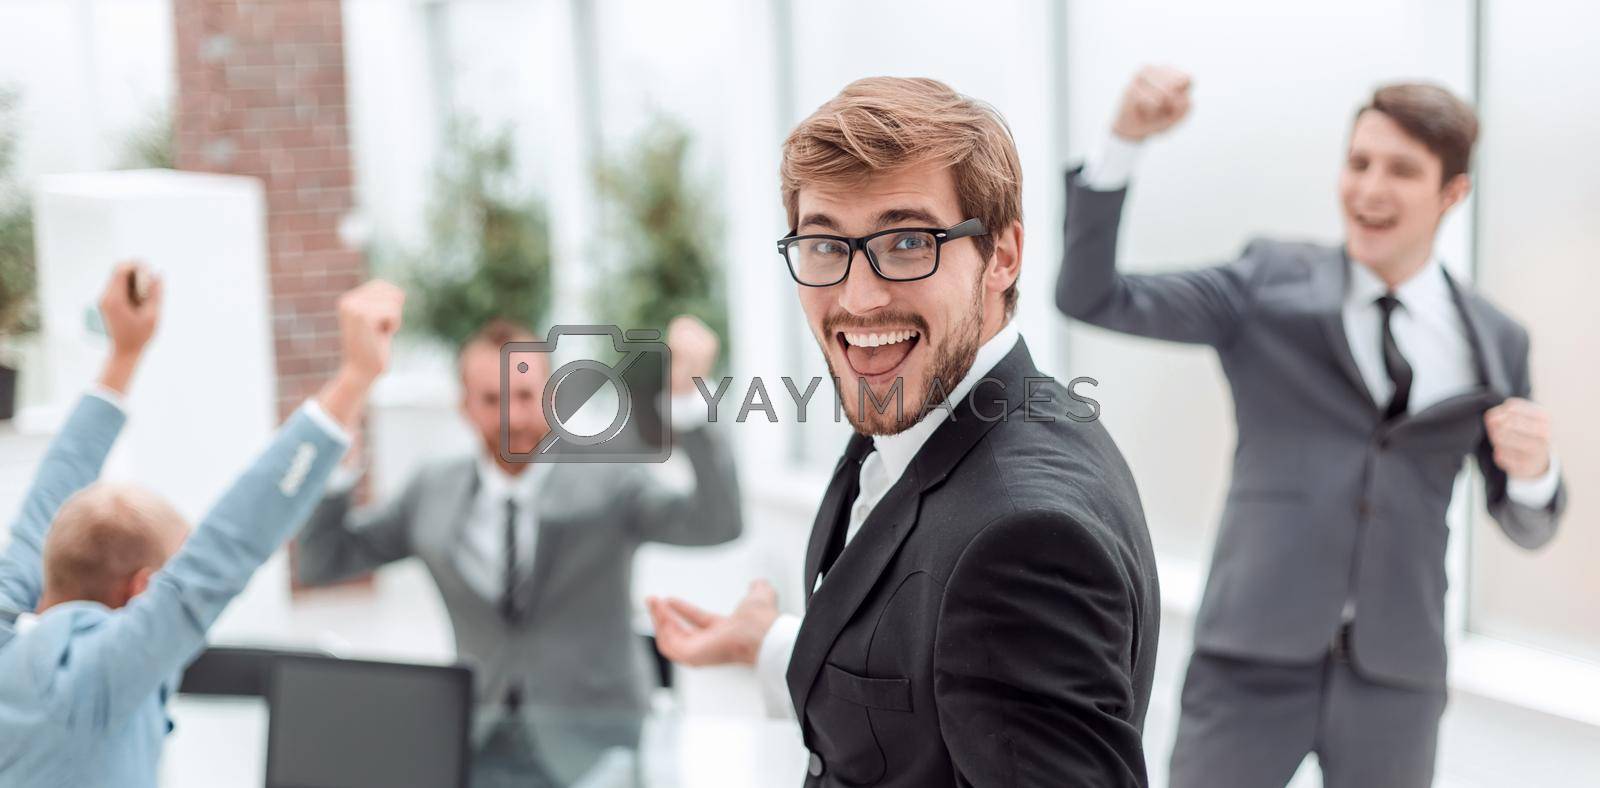 Royalty free image of close up. happy boss standing in the office by asdf